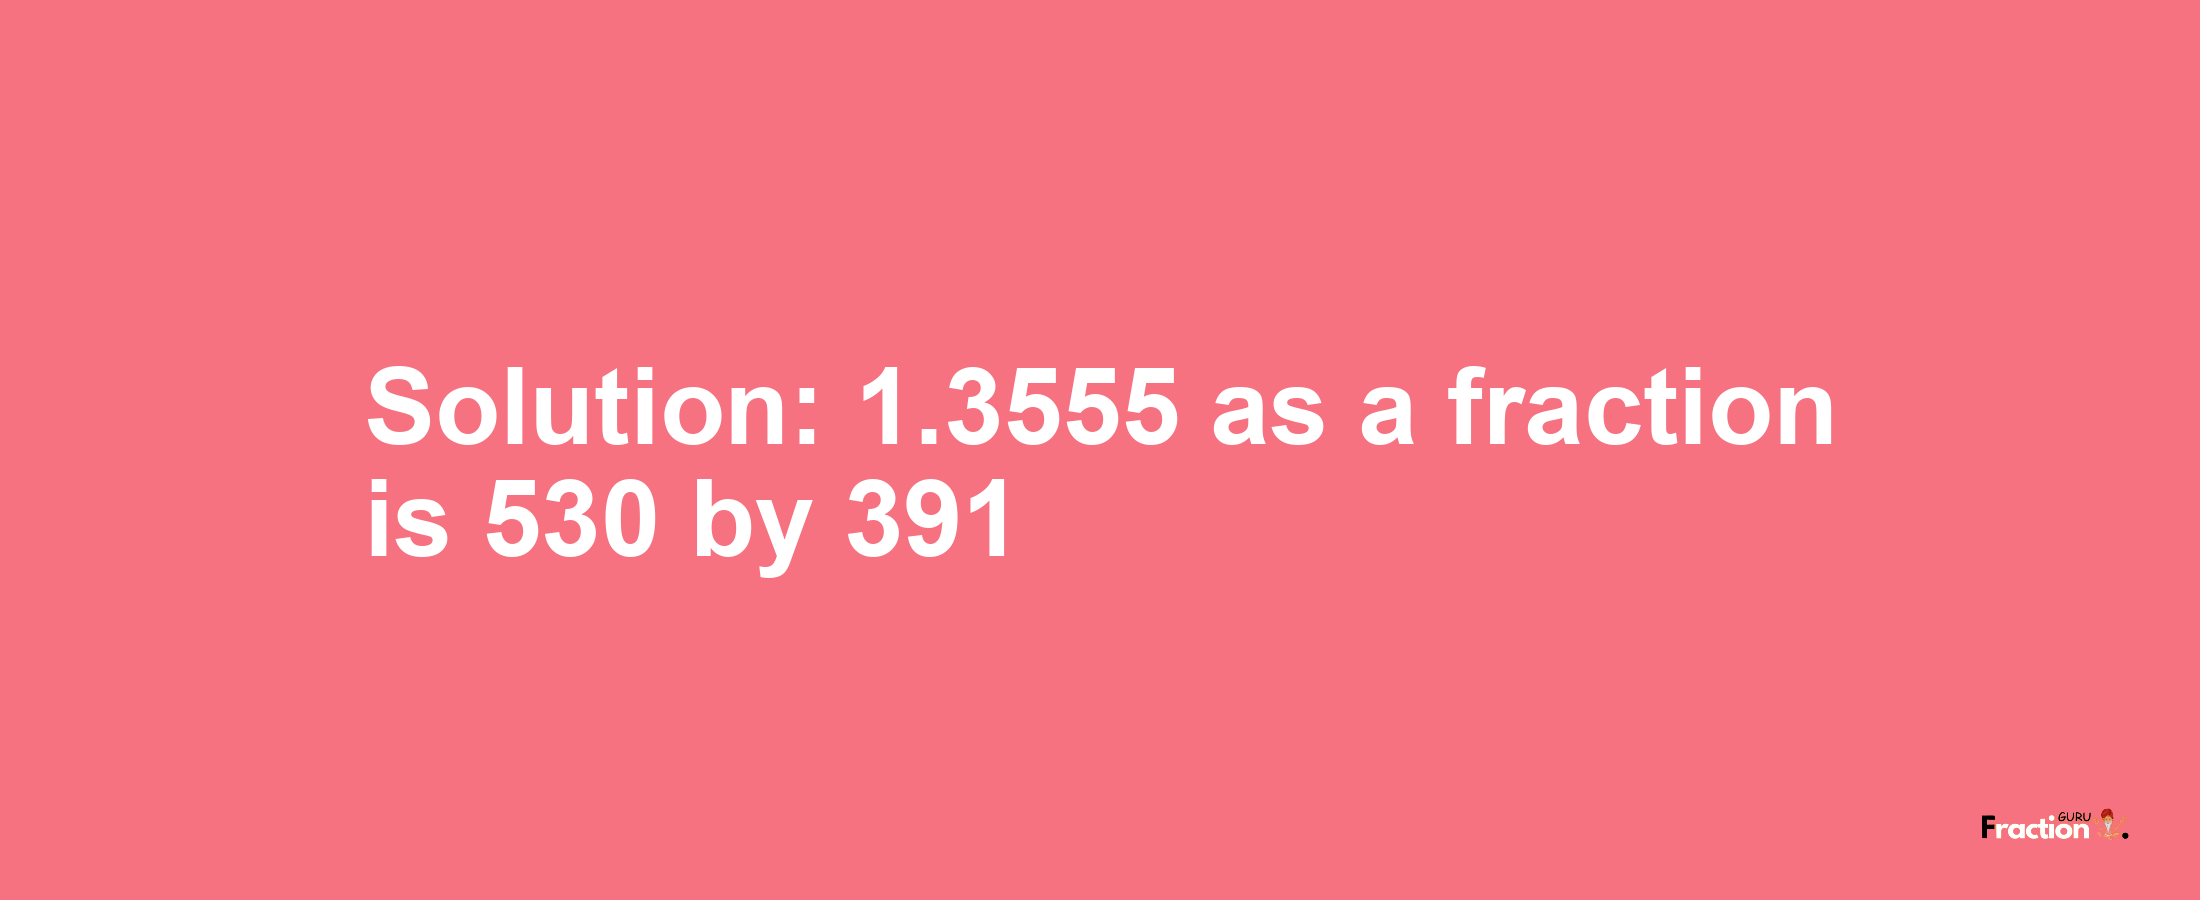 Solution:1.3555 as a fraction is 530/391